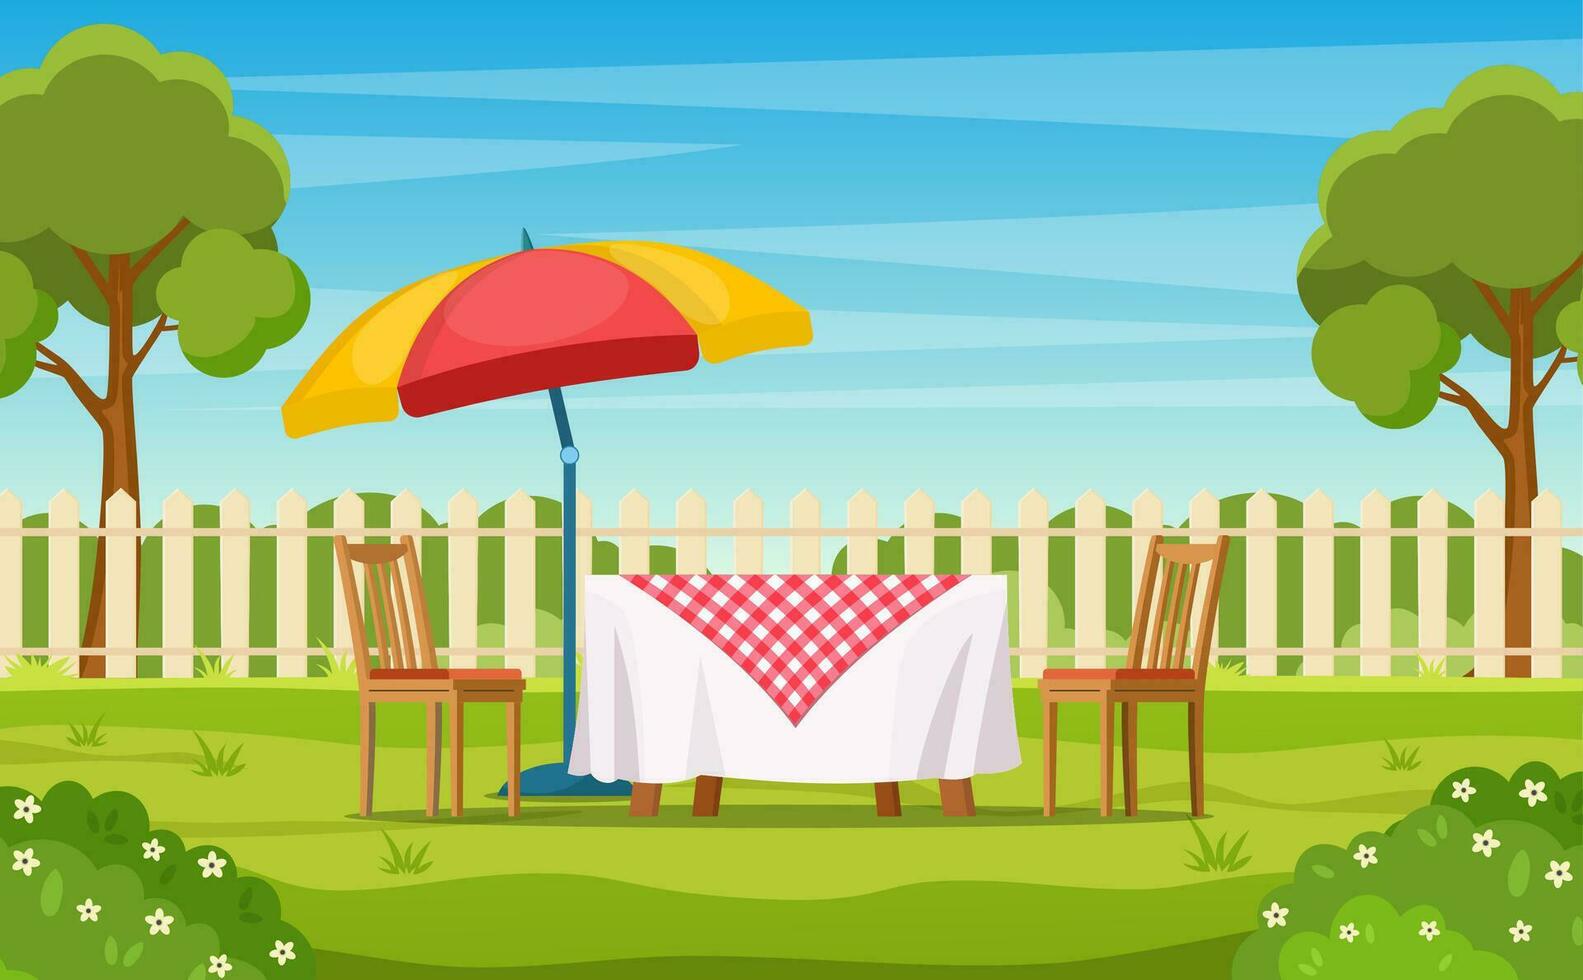 House backyard with green grass lawn, trees and bushes. Cartoon table and chairs garden modern furniture with large umbrella. Outdoor area for BBQ summer parties. Vector illustration in flat style